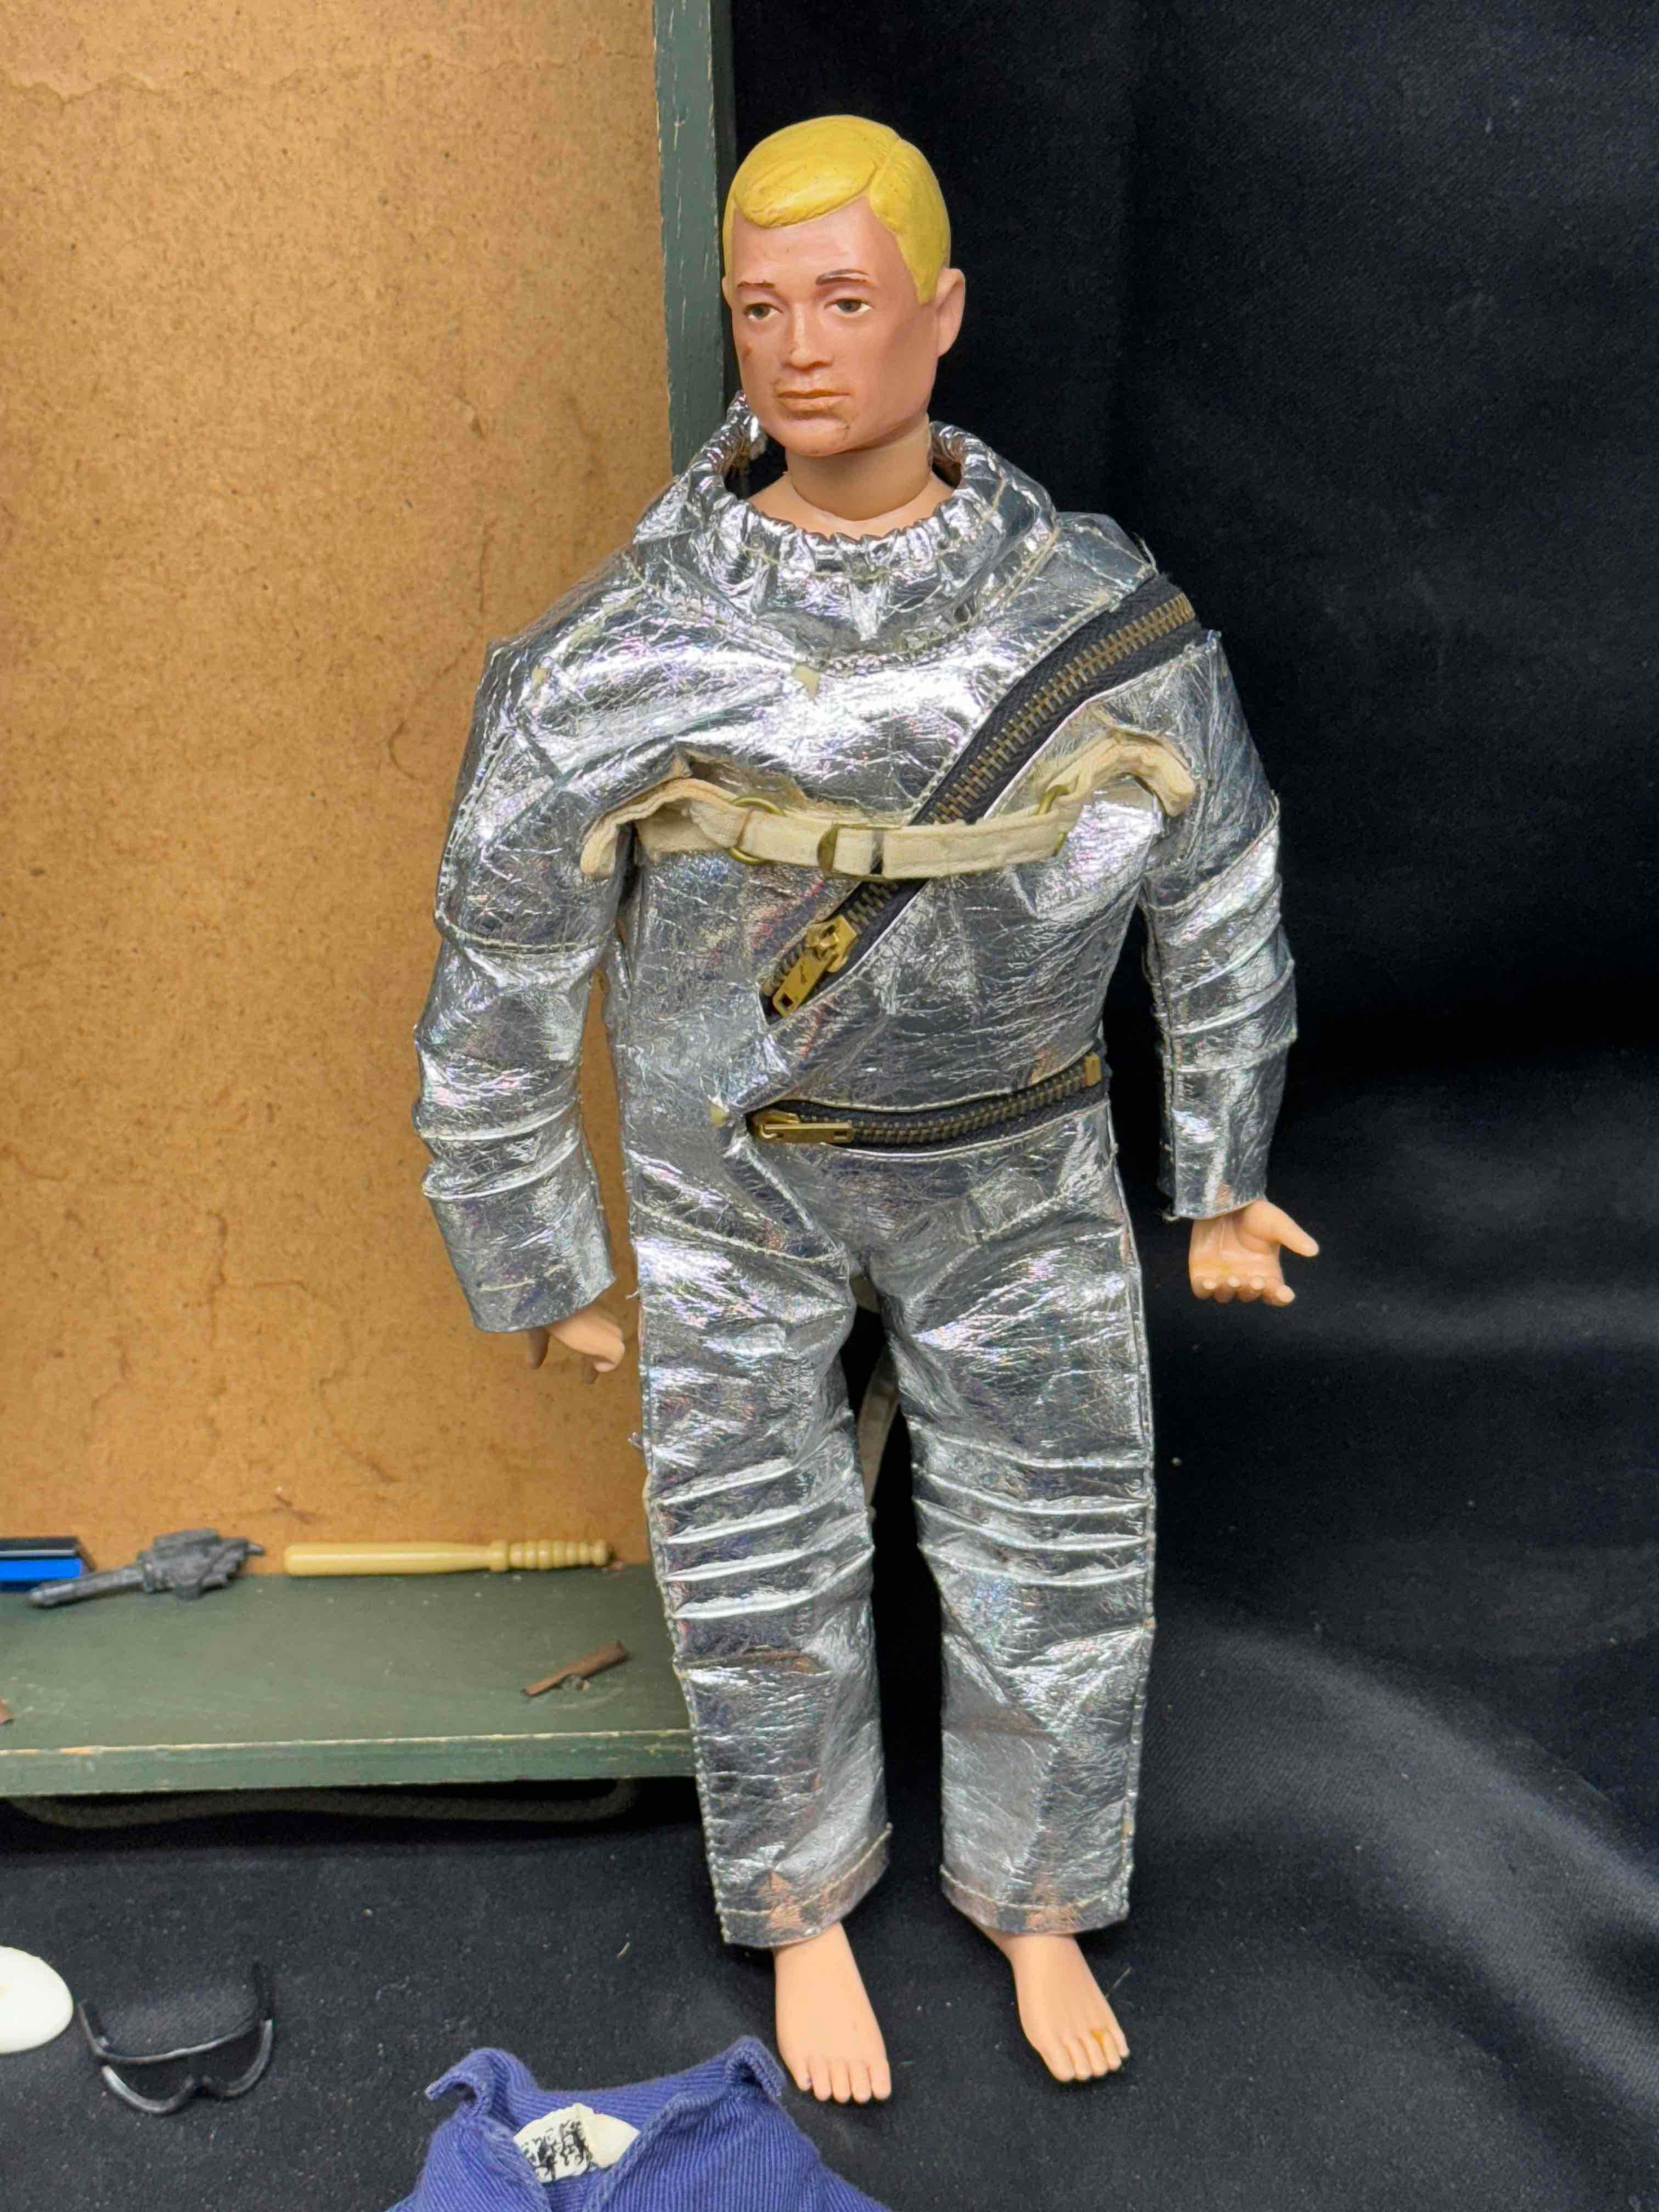 Vintage 1964 G.I. Joe Astronaut Figure with assorted Clothing and accessories and box